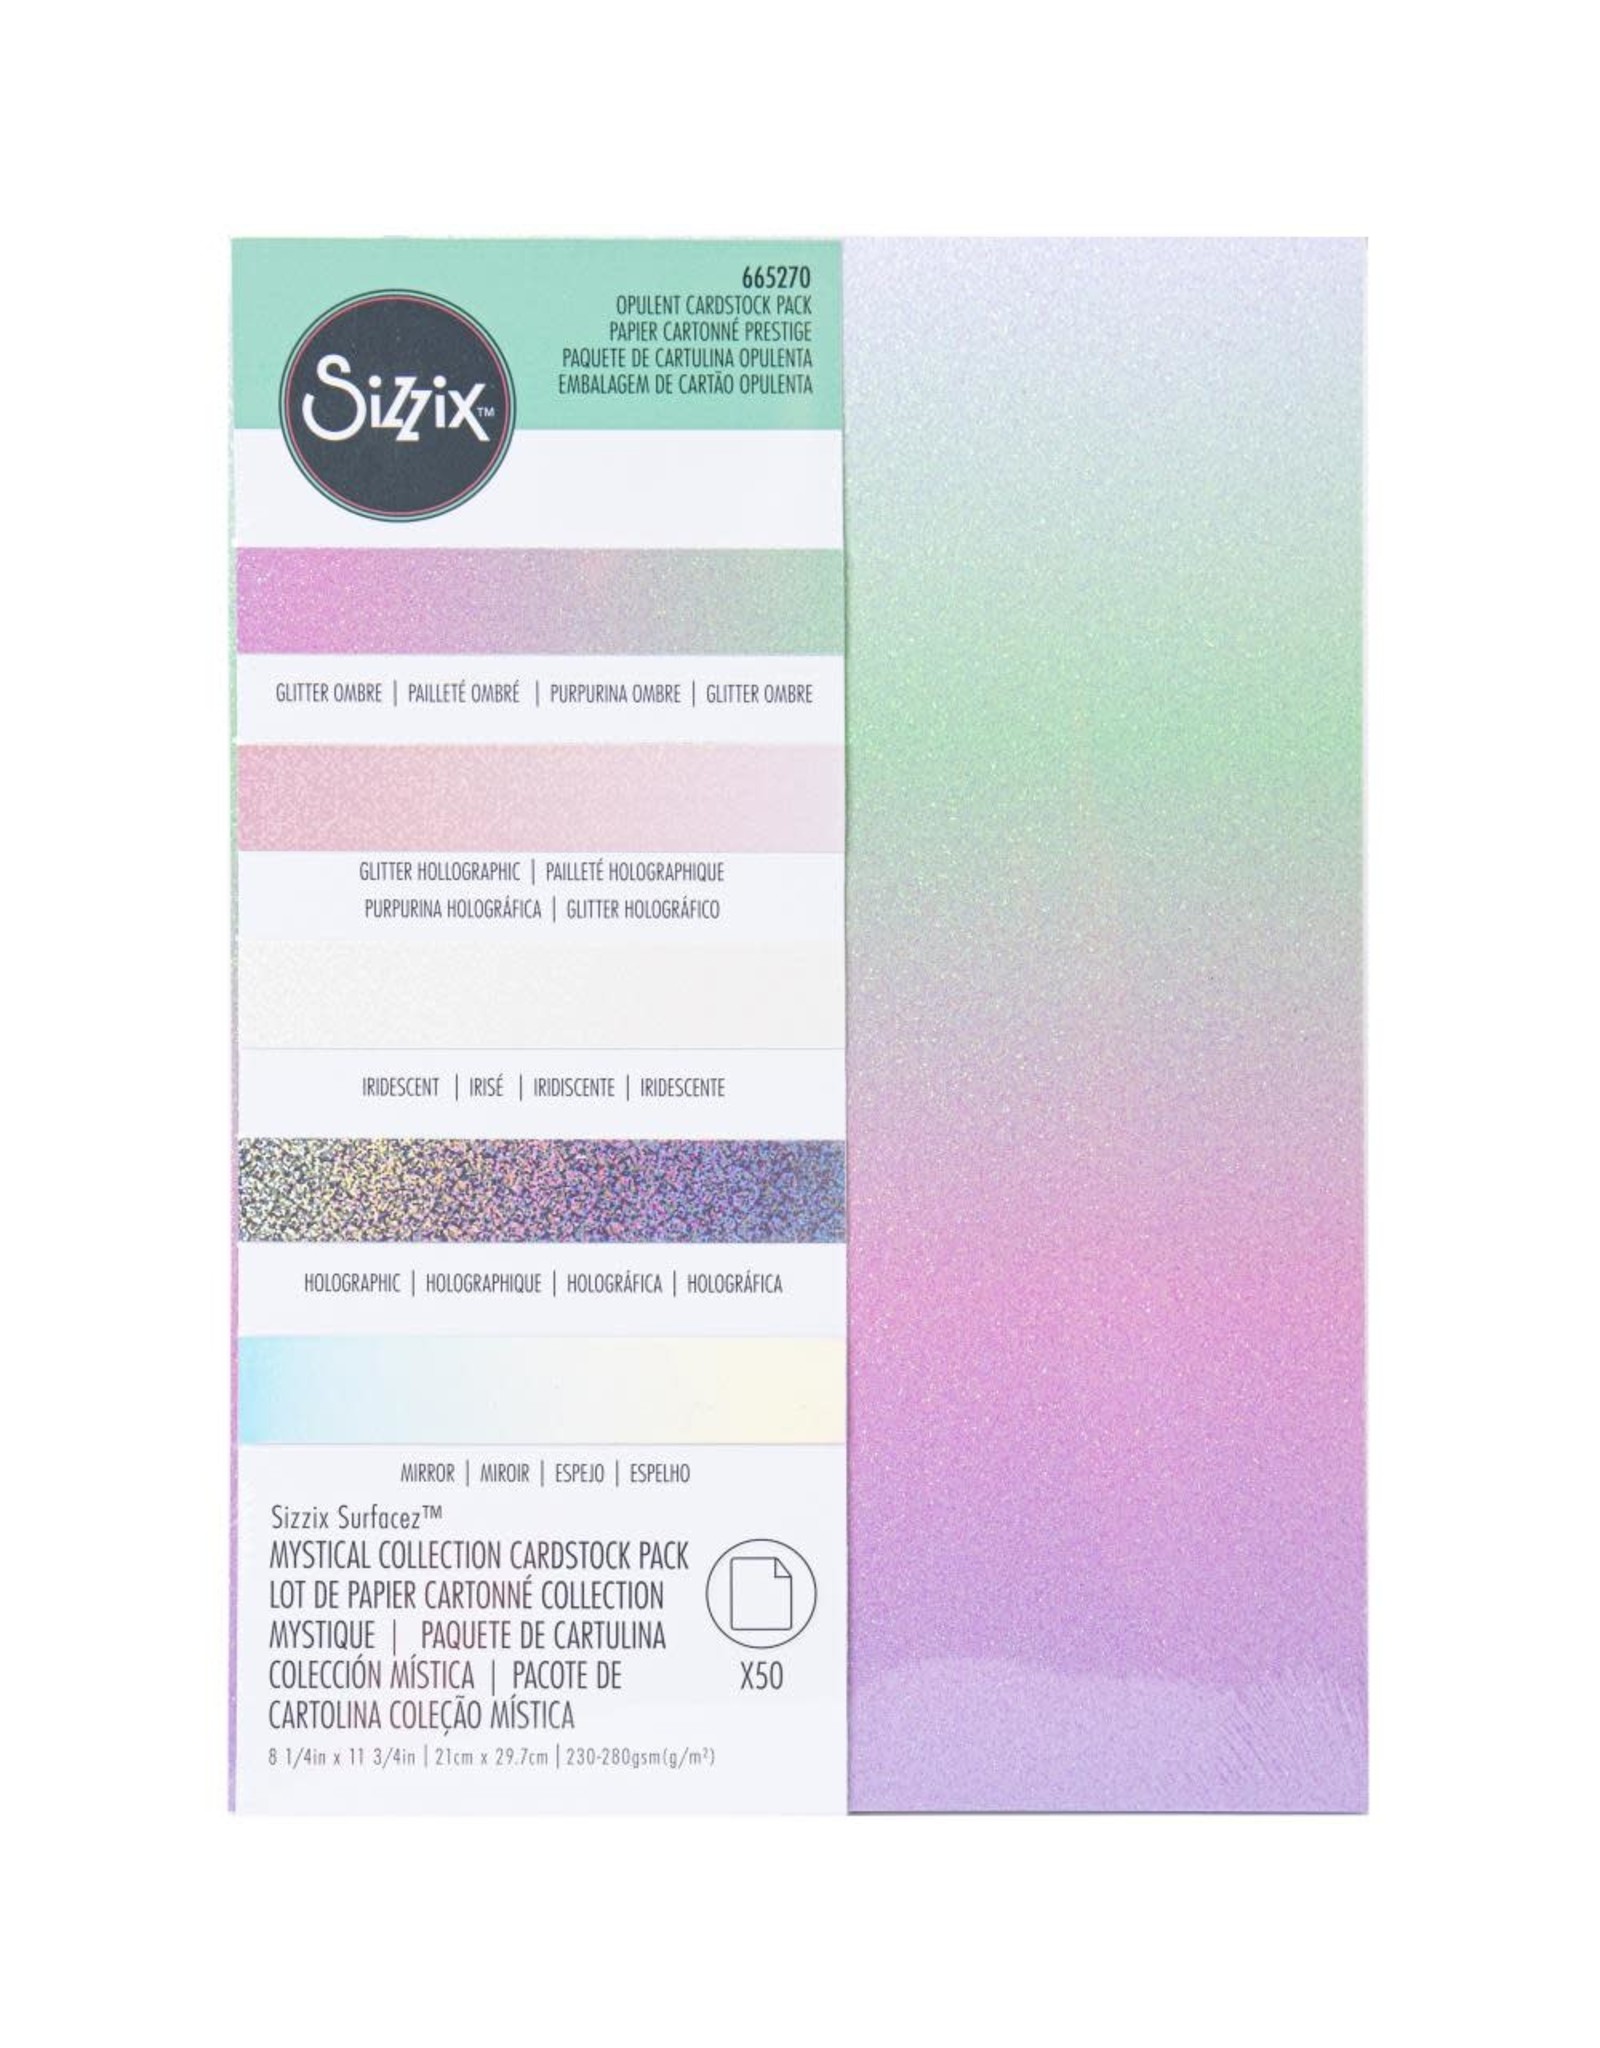 SIZZIX SIZZIX MYSTICAL COLLECTION OPULENT CARDSTOCK PACK 5 TYPES/50 SHEETS